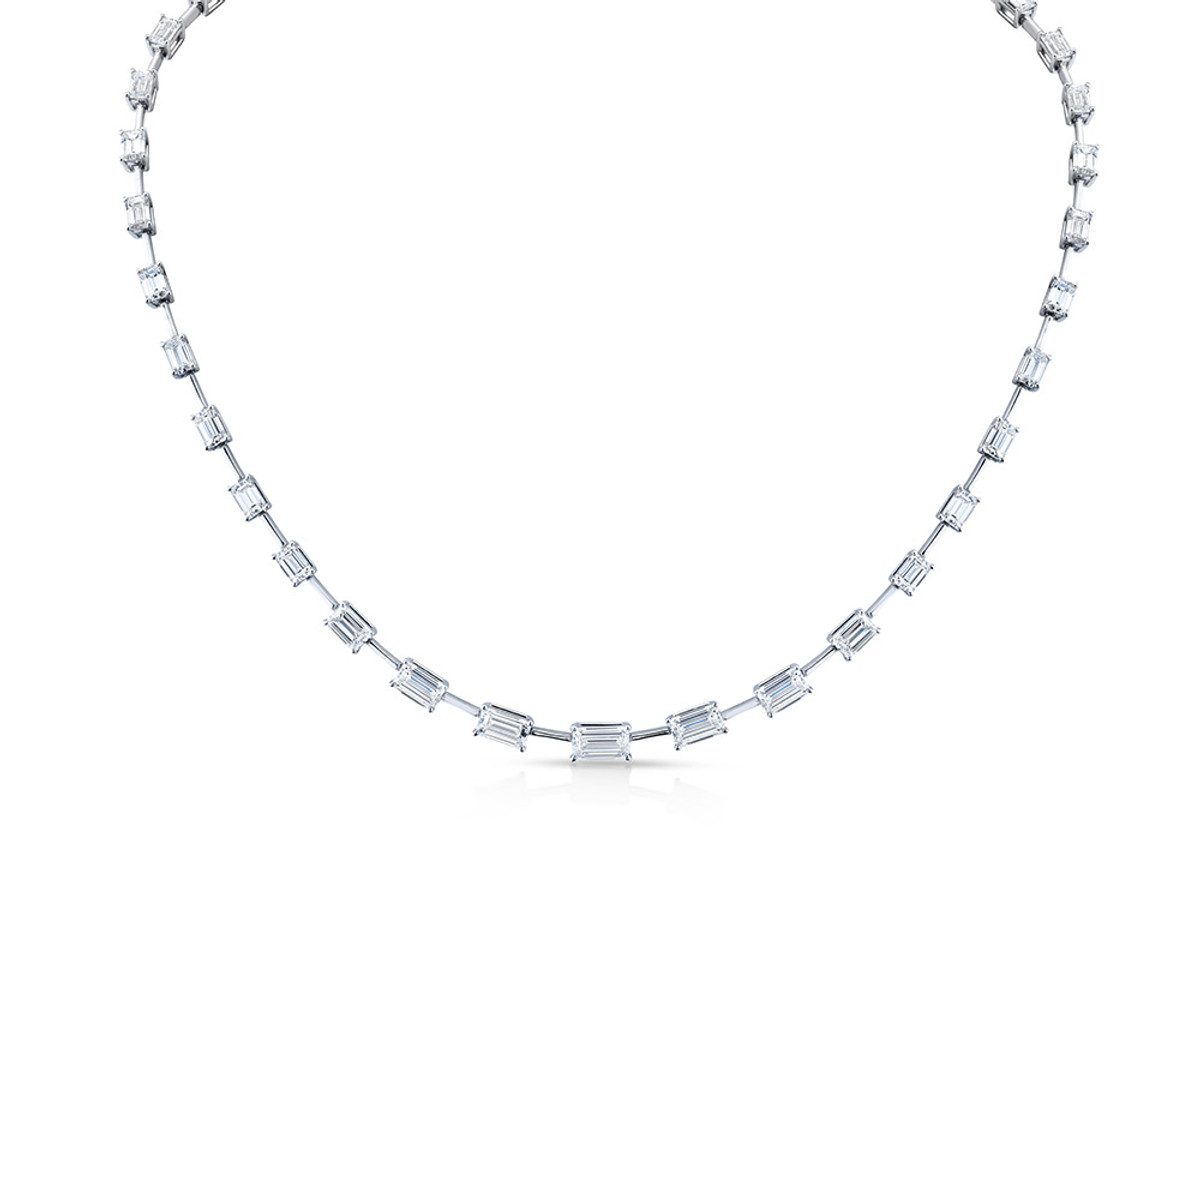 Hyde Park Collection 18K White Gold Emerald Diamond Necklace-49136 Product Image